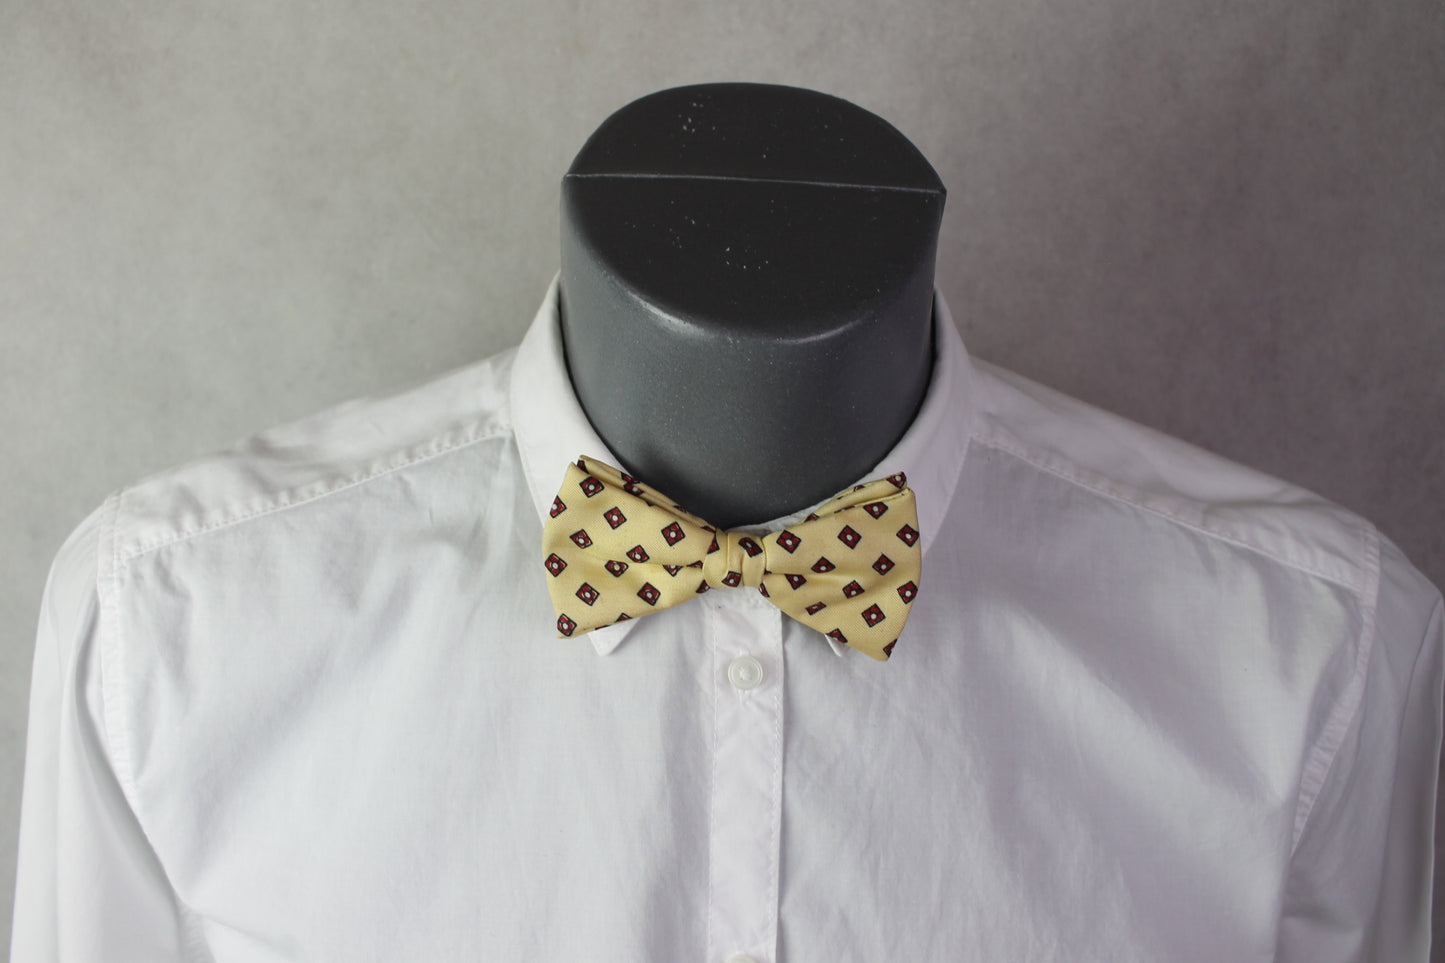 Vintage pre-tied clip on cream yellow red squares pattern bow tie